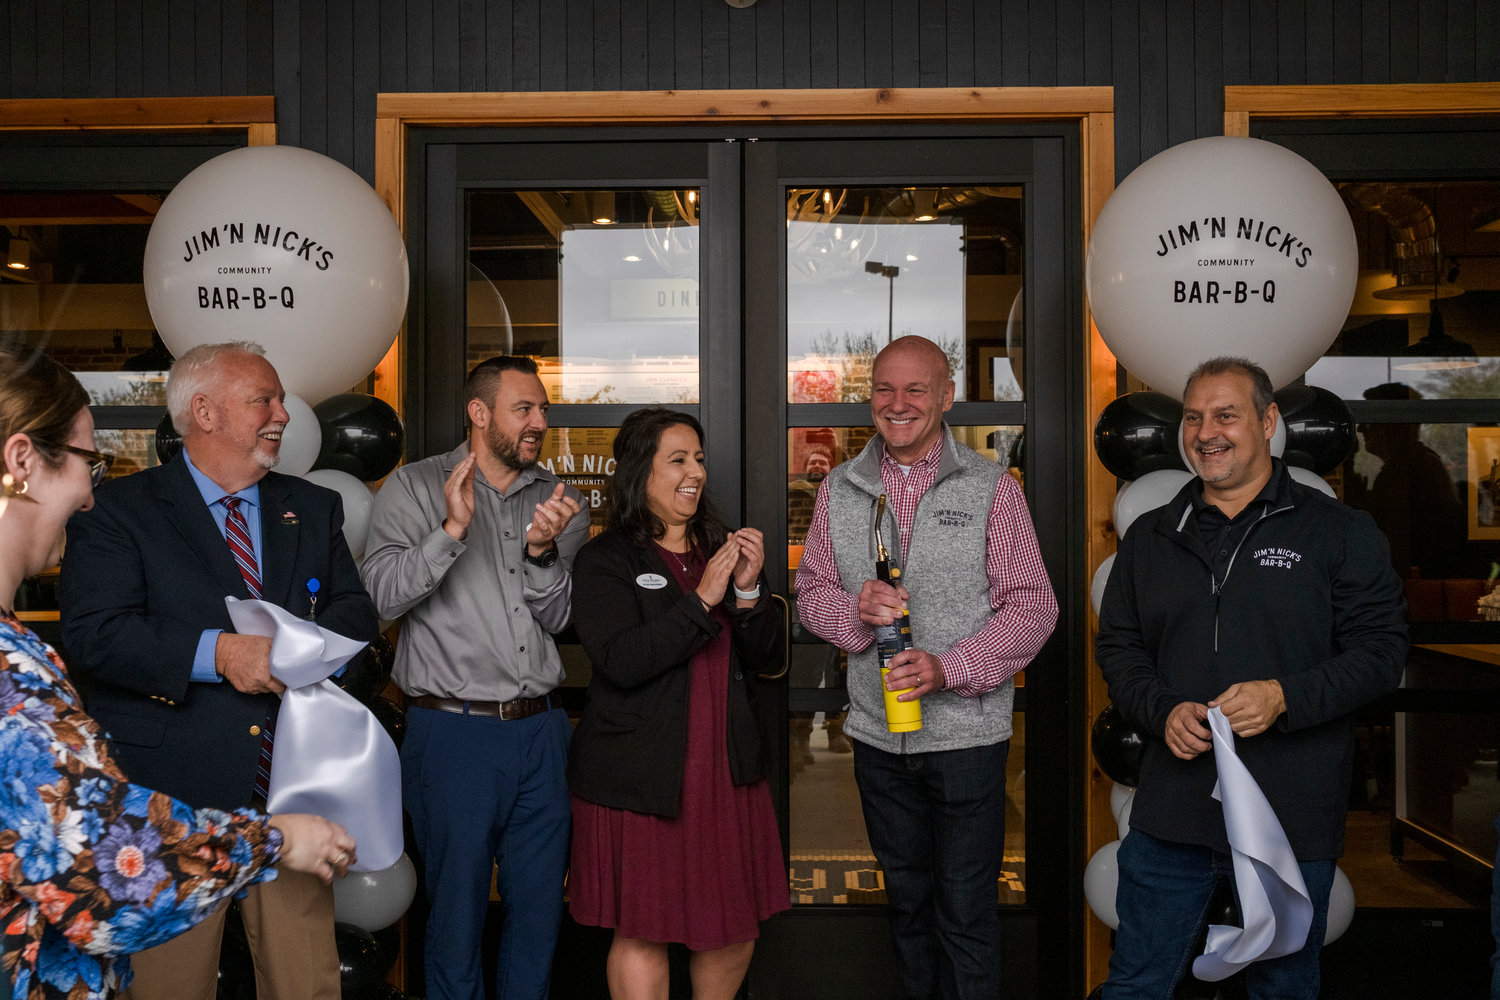 Brian Lyman, President of Jim ’N Nicks Community Bar-B-Q, celebrates with members of the South Baldwin Chamber of Commerce and City of Foley after the ribbon cutting at their newest location on Highway 59.